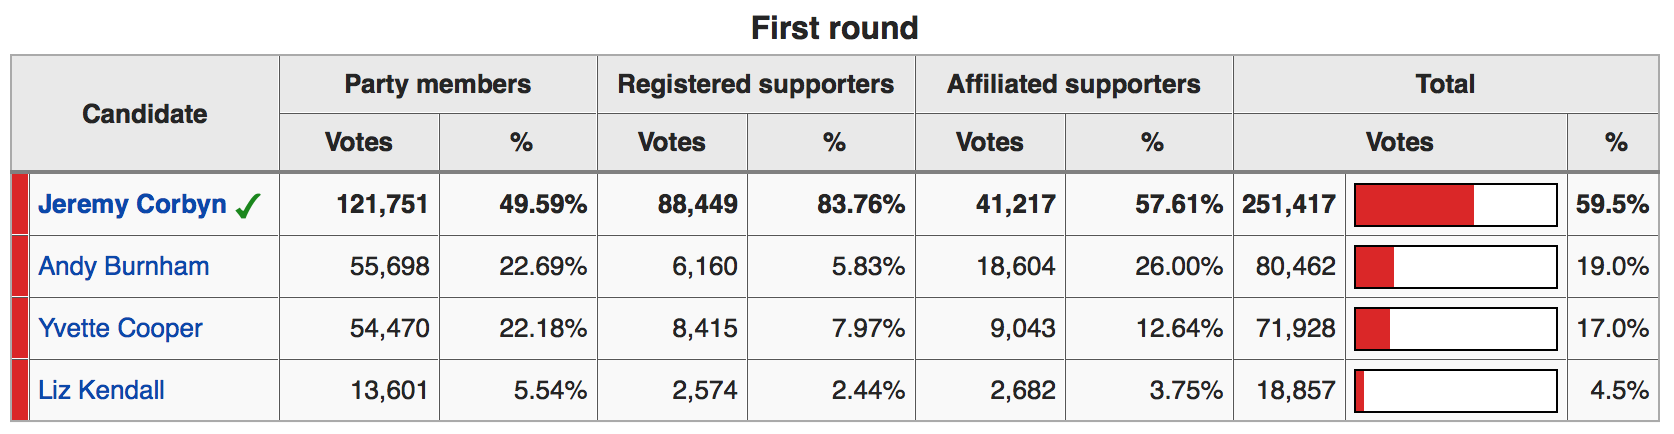 Source: https://en.wikipedia.org/wiki/Labour_Party_(UK)_leadership_election,_2015#Result